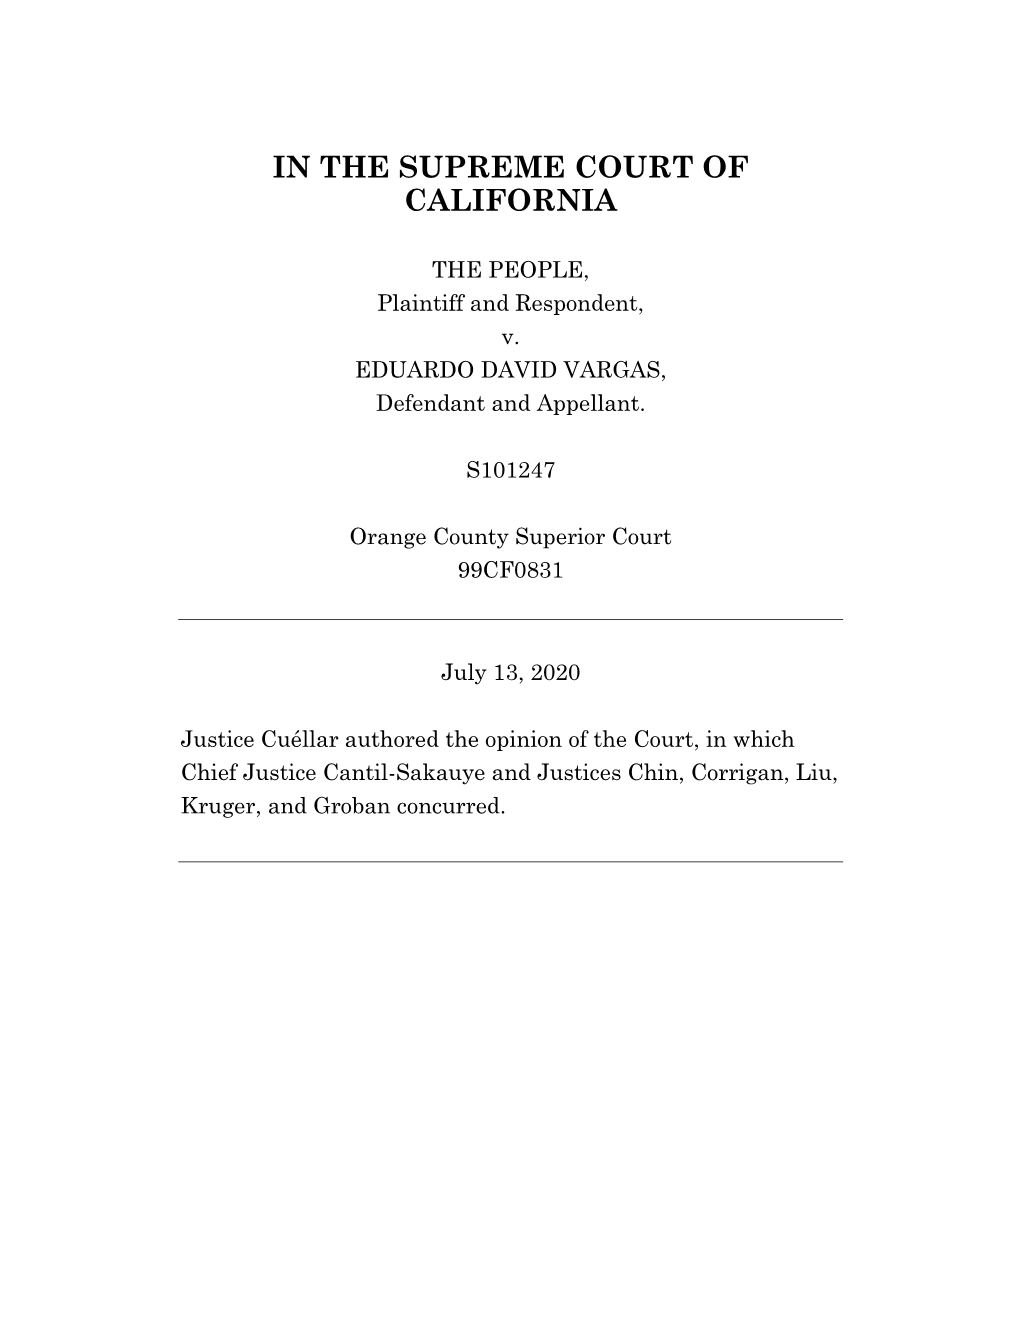 Opinion of the Court, in Which Chief Justice Cantil-Sakauye and Justices Chin, Corrigan, Liu, Kruger, and Groban Concurred